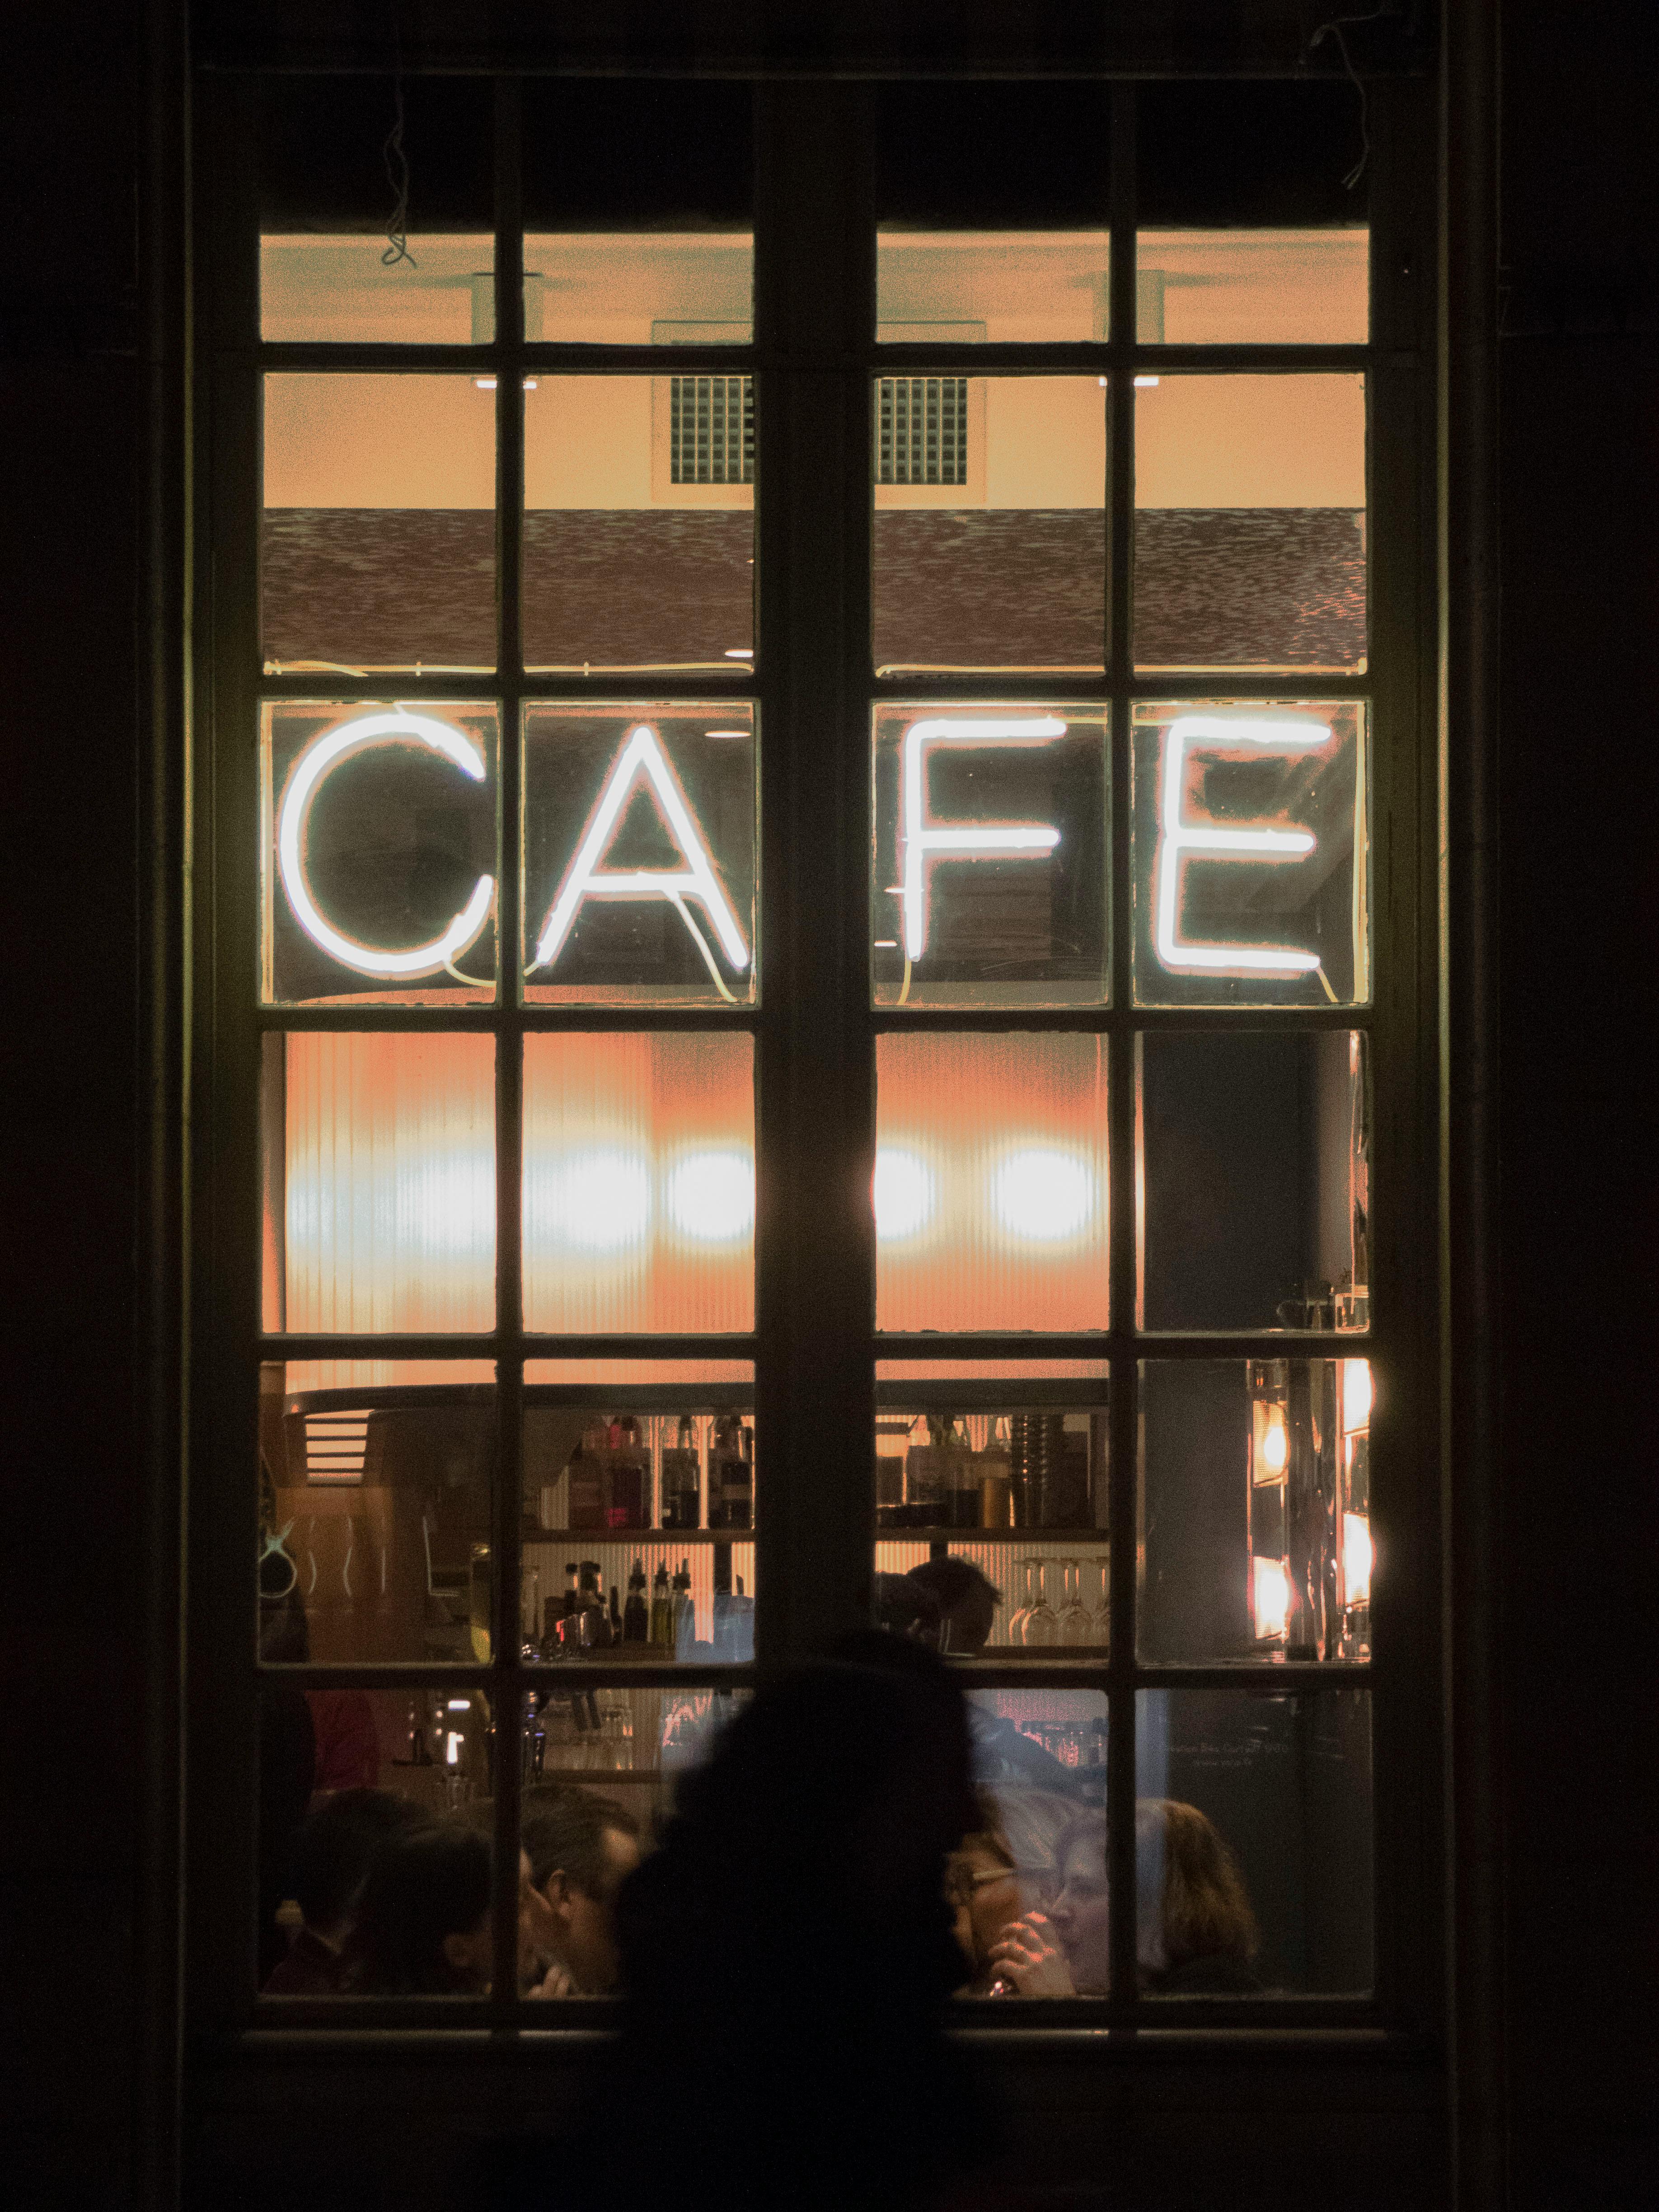 The exterior of a cafe | Source: Pexels